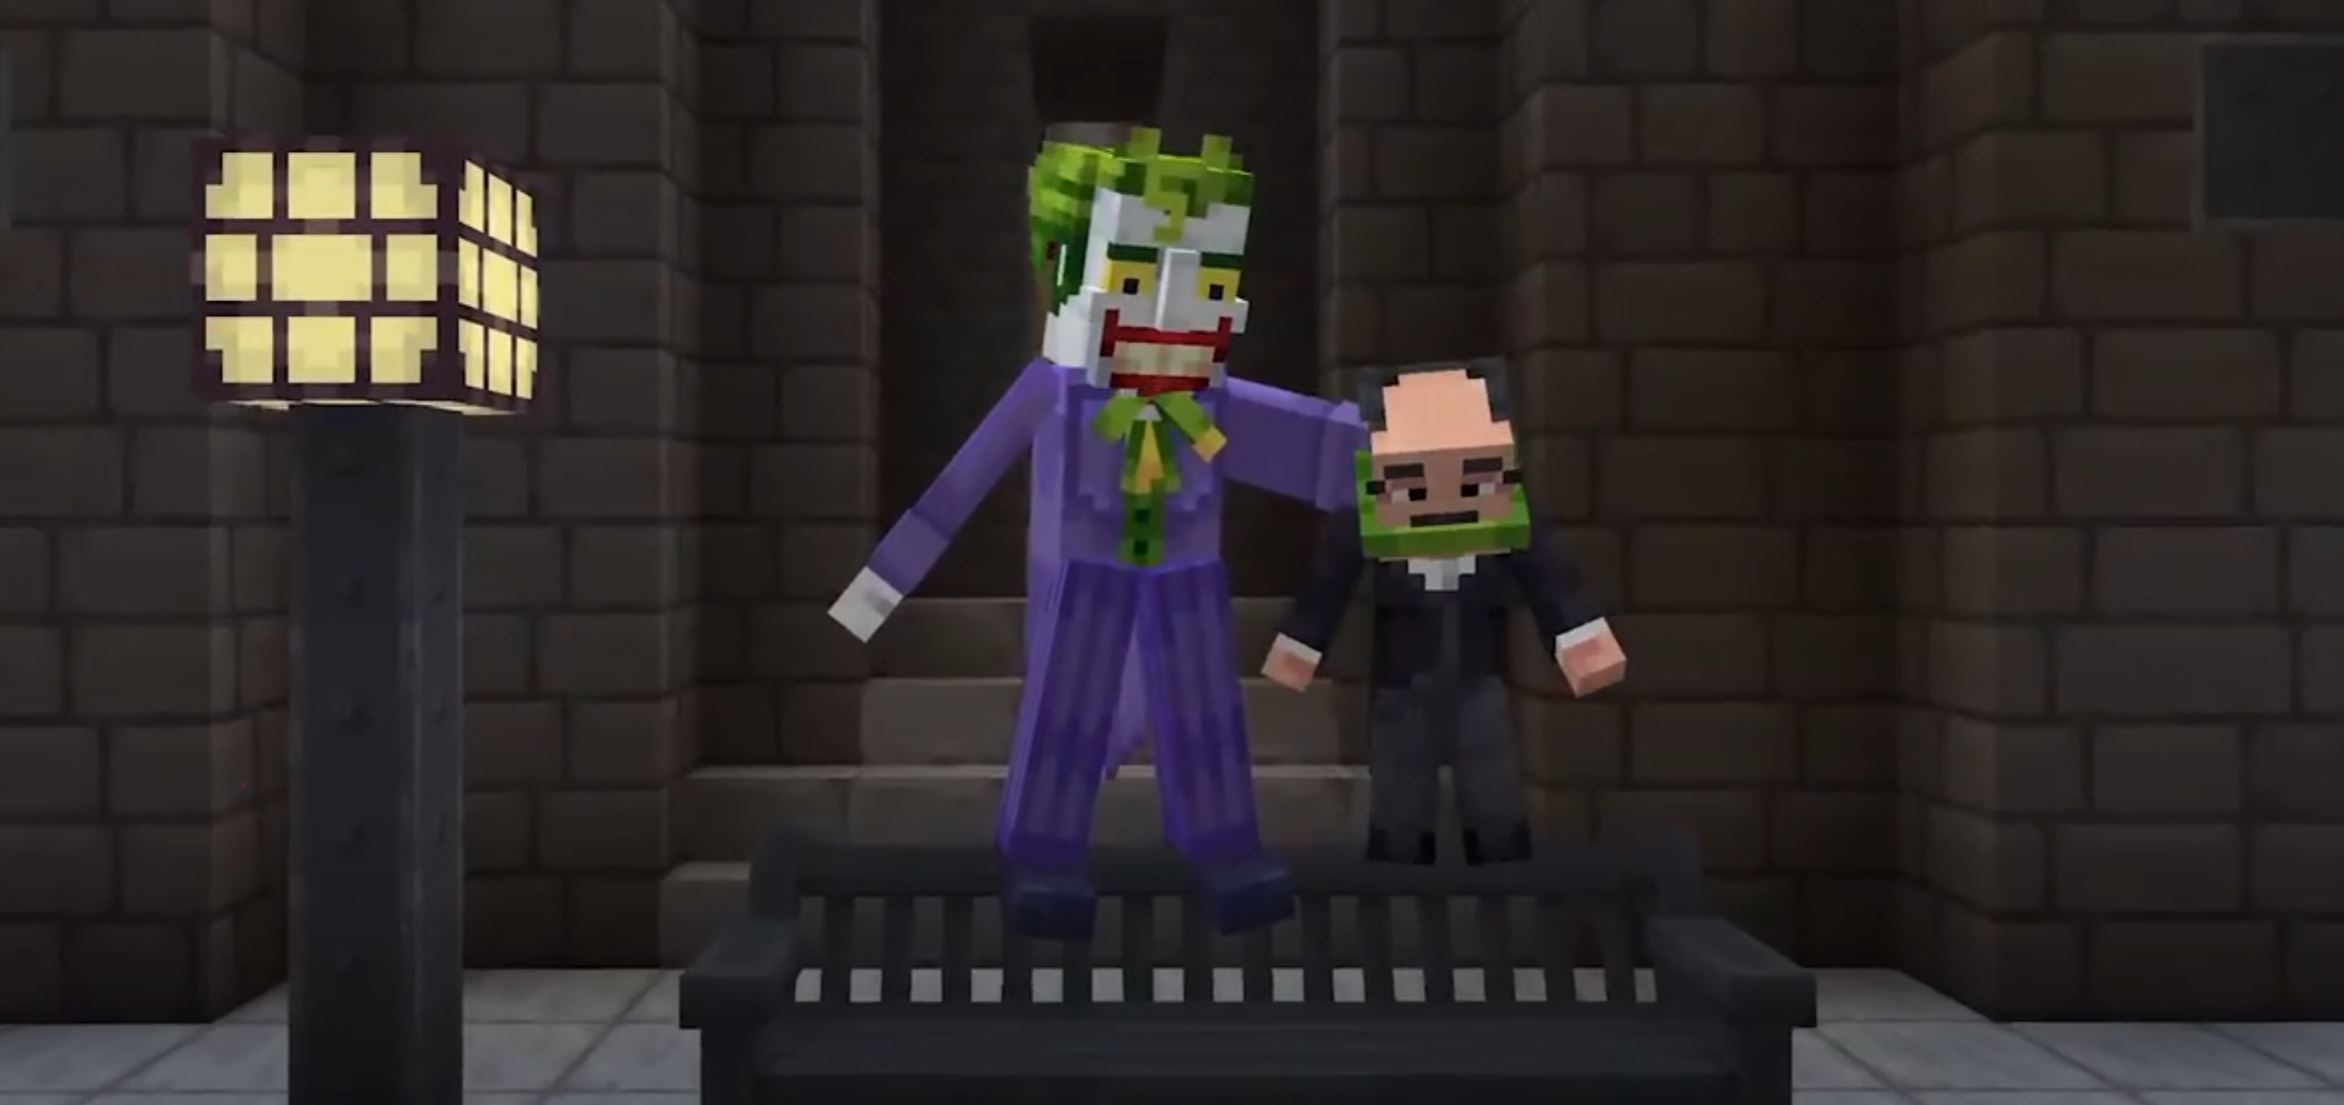 The Joker standing and holding a prisoner in the Minecraft Batman DLC